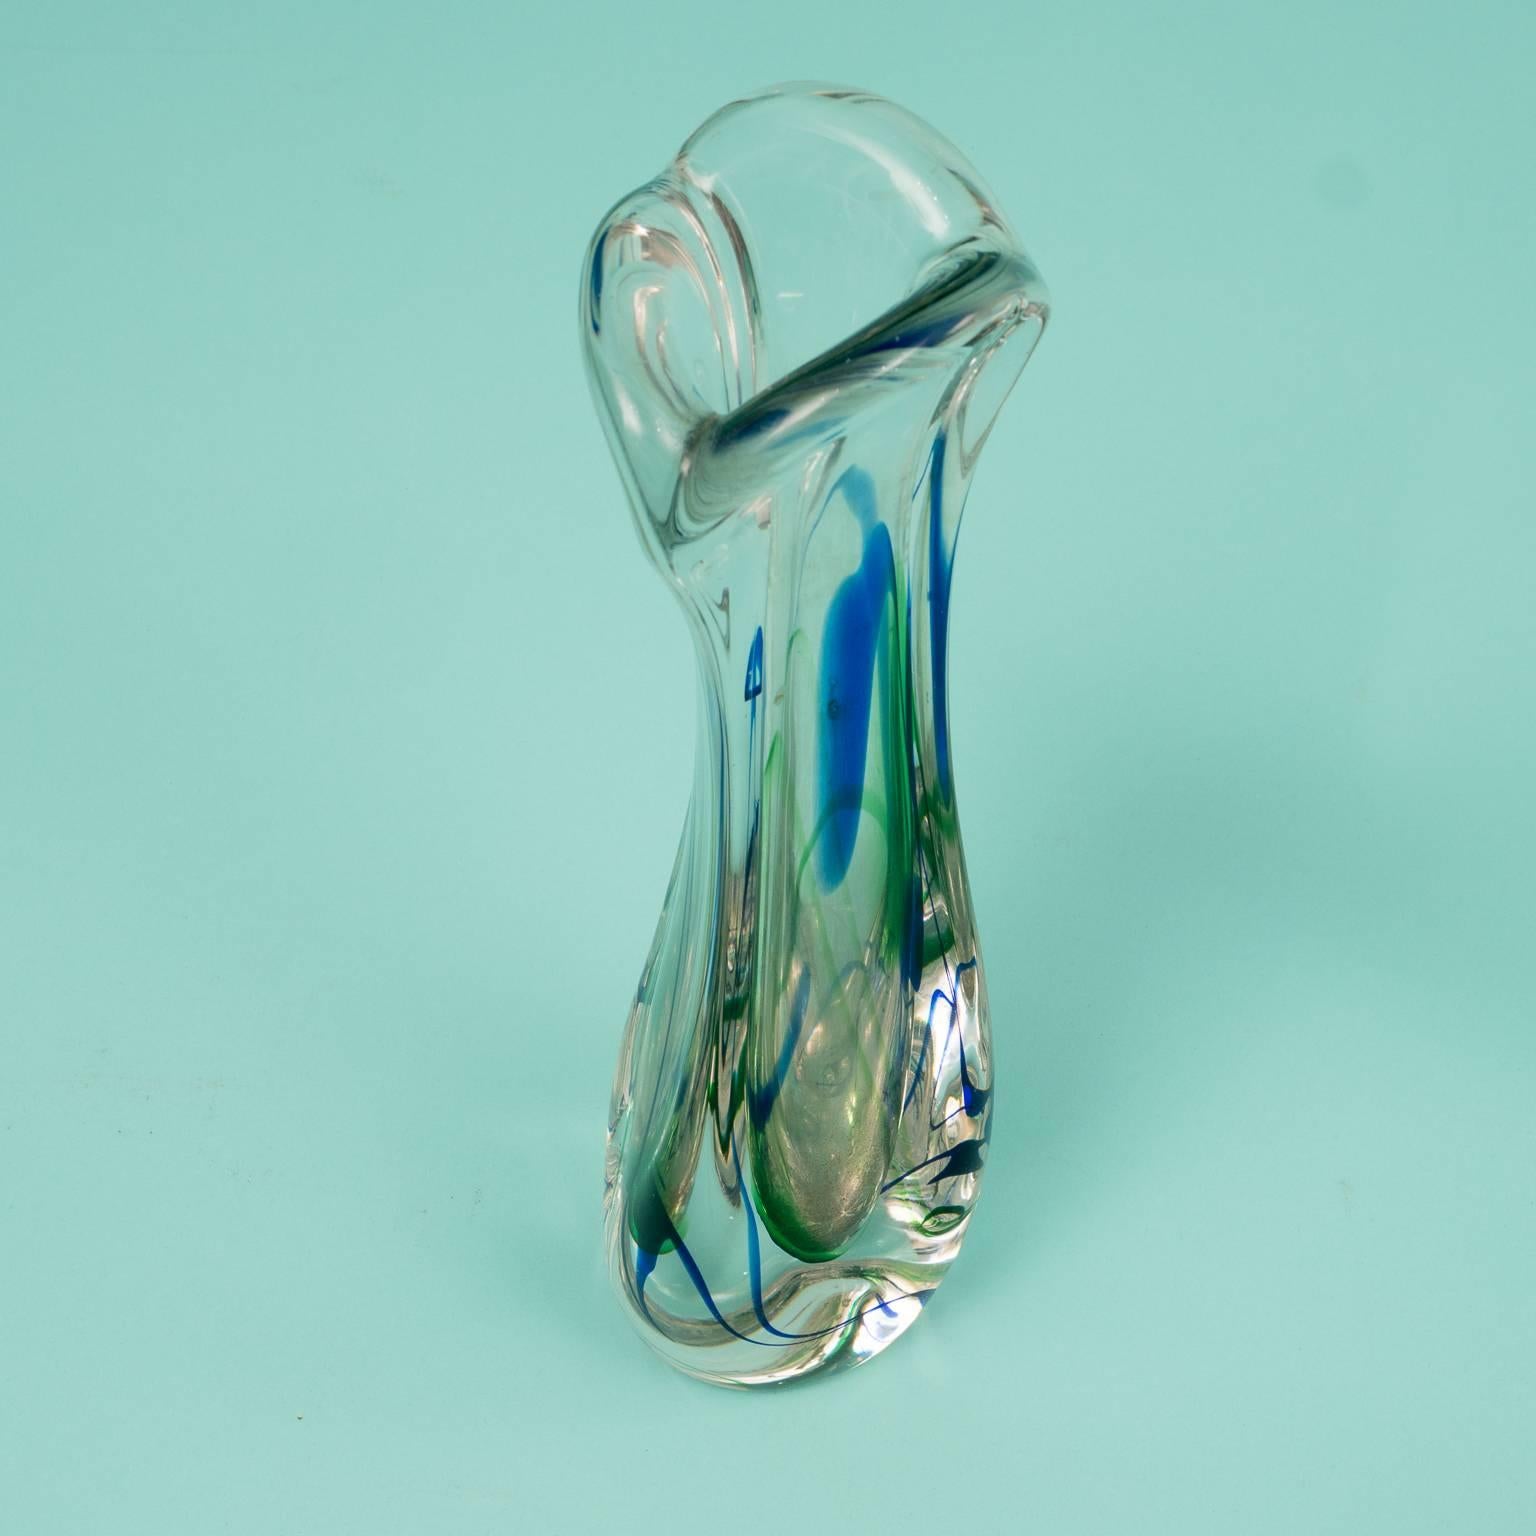 High-quality vase from the 1960s by Max Verboeket for Kristalunie, Maastricht. Smoothed glass with bicolored pattern in blue and green.

Very good condition.